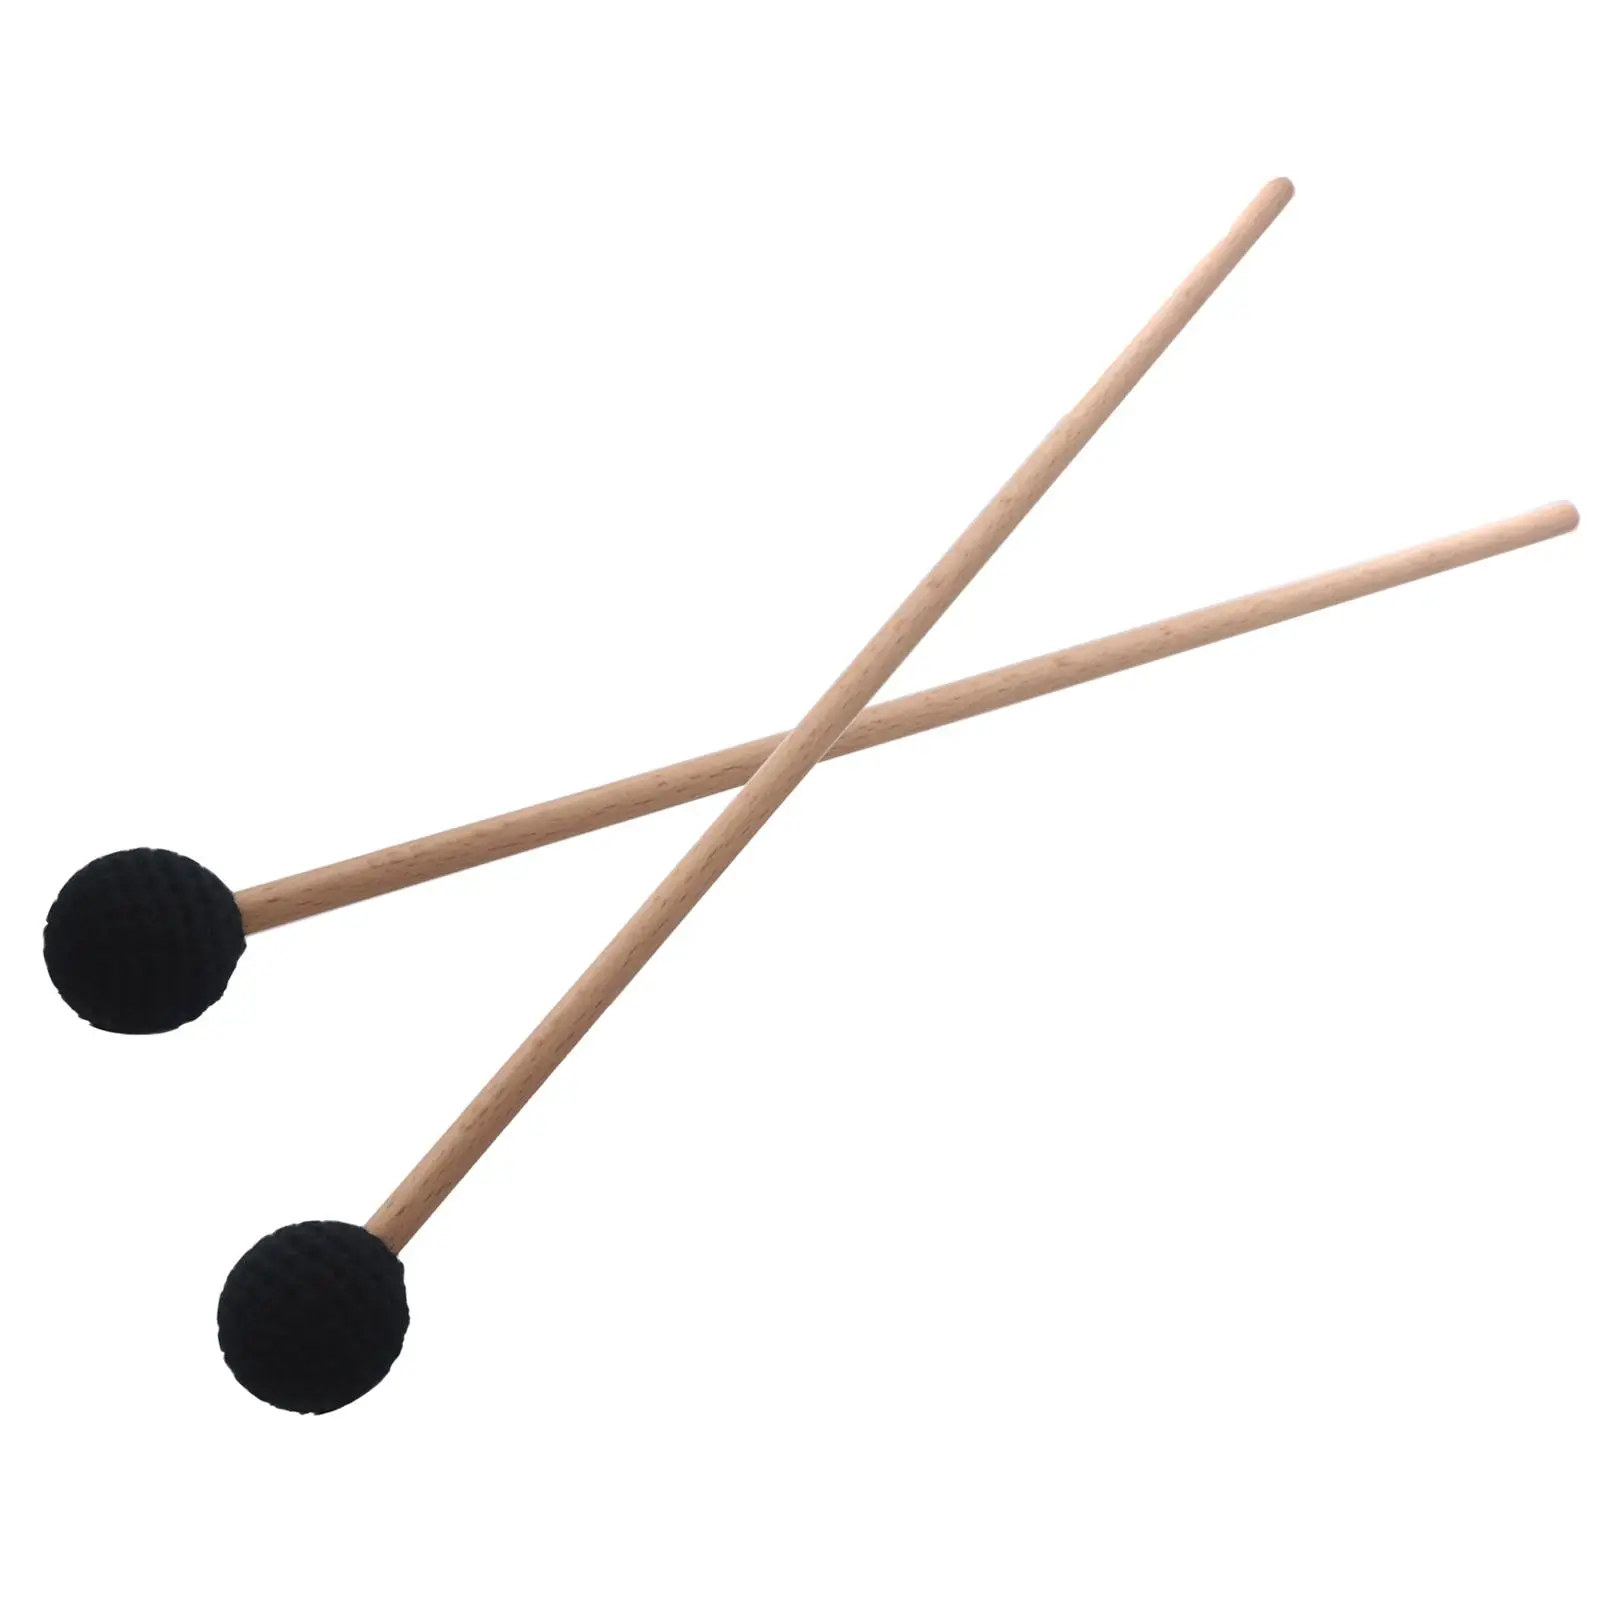 2Pcs Bell Mallets Glockenspiel Sticks, Xylophone Mallet Percussion with Wood Handle, 17 Inch Long